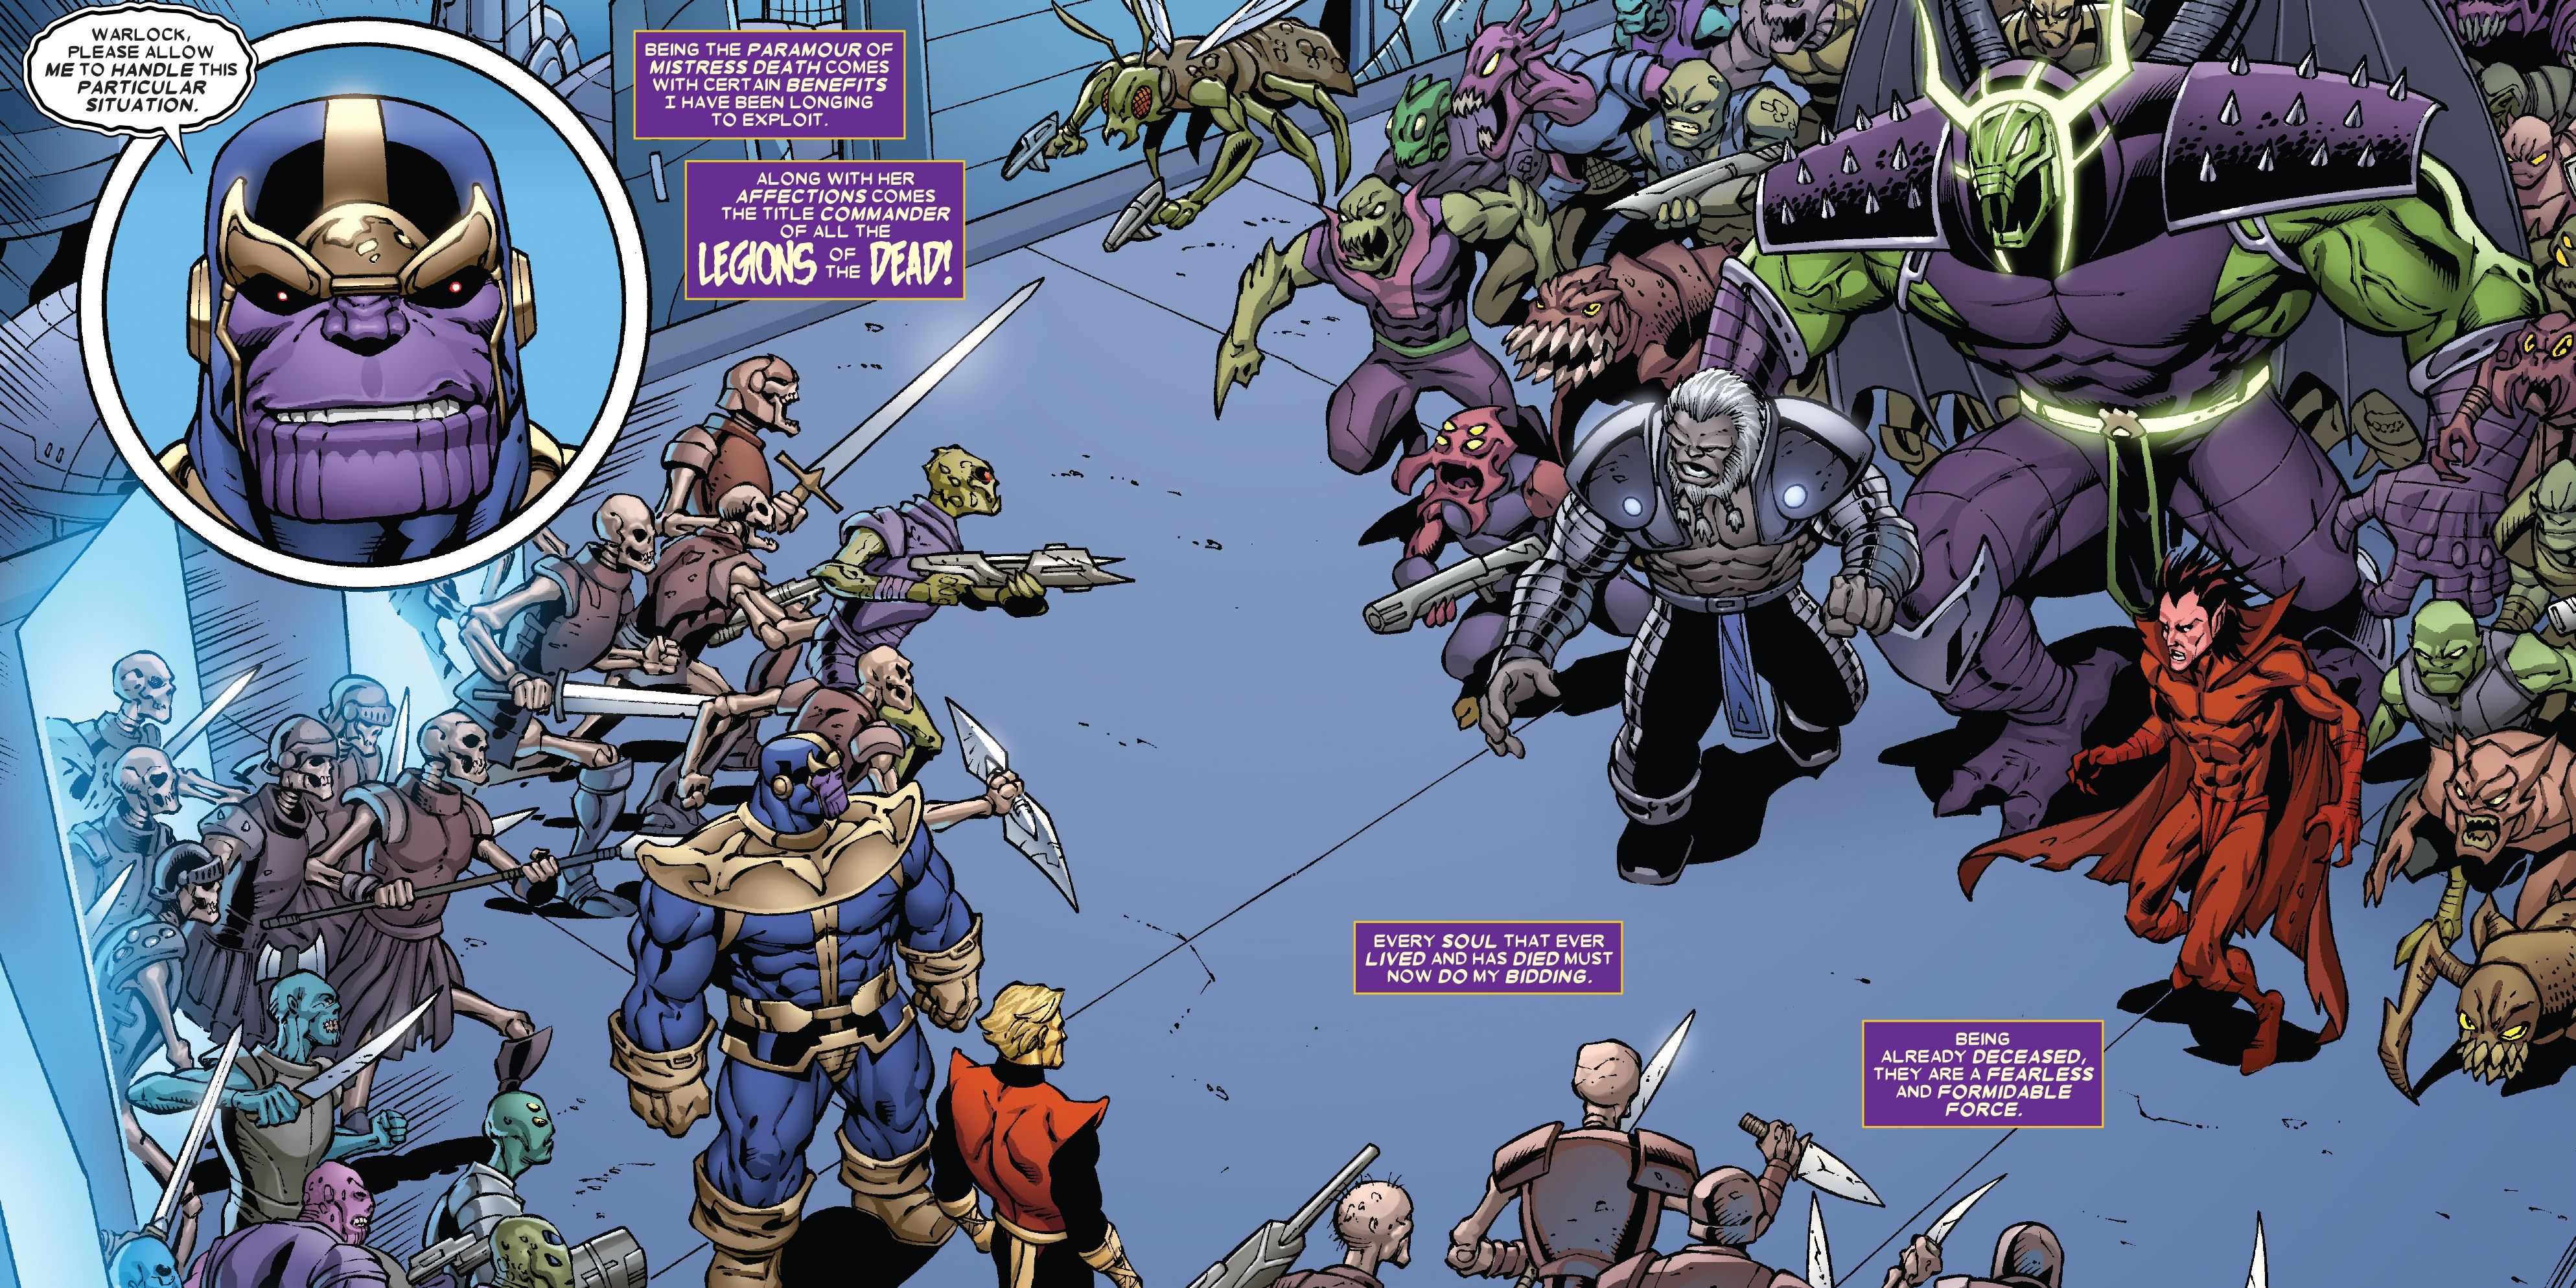 Thanos commands the Legions of the Dead against Annihilus’s army in the Negative Zone